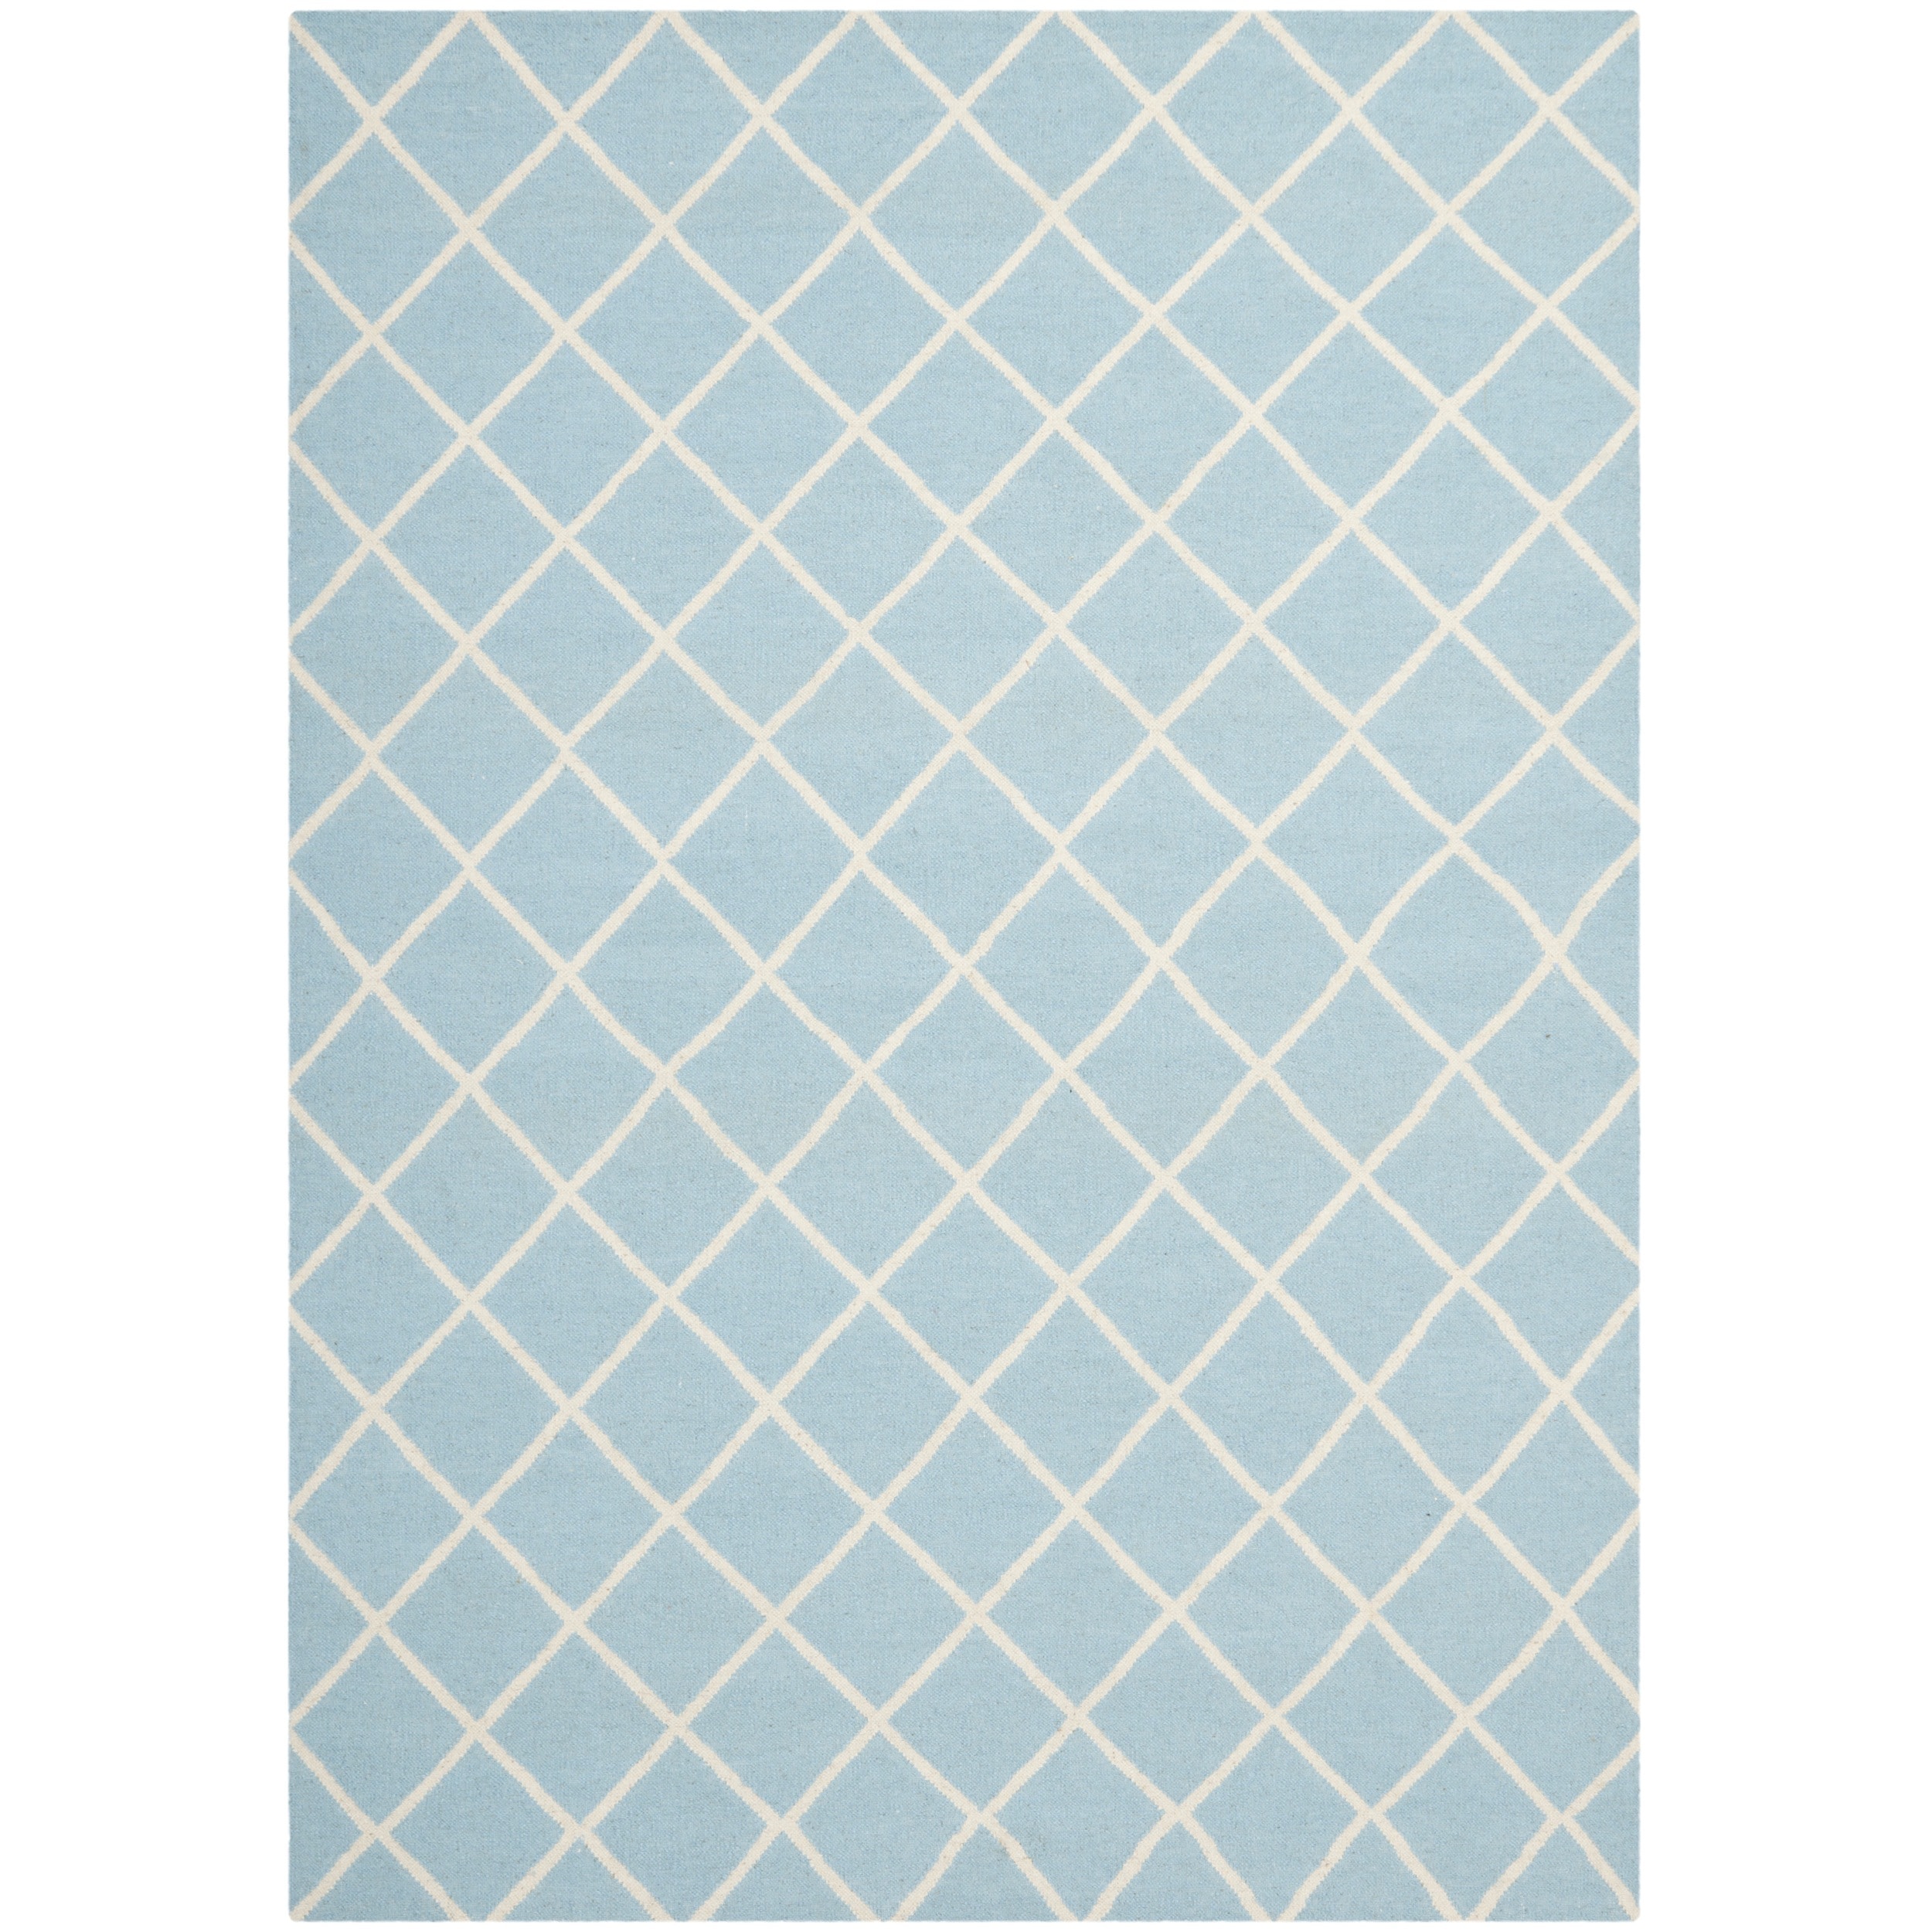 Safavieh Handwoven Moroccan Dhurrie Square pattern Light Blue/ Ivory Wool Rug (9 X 12)